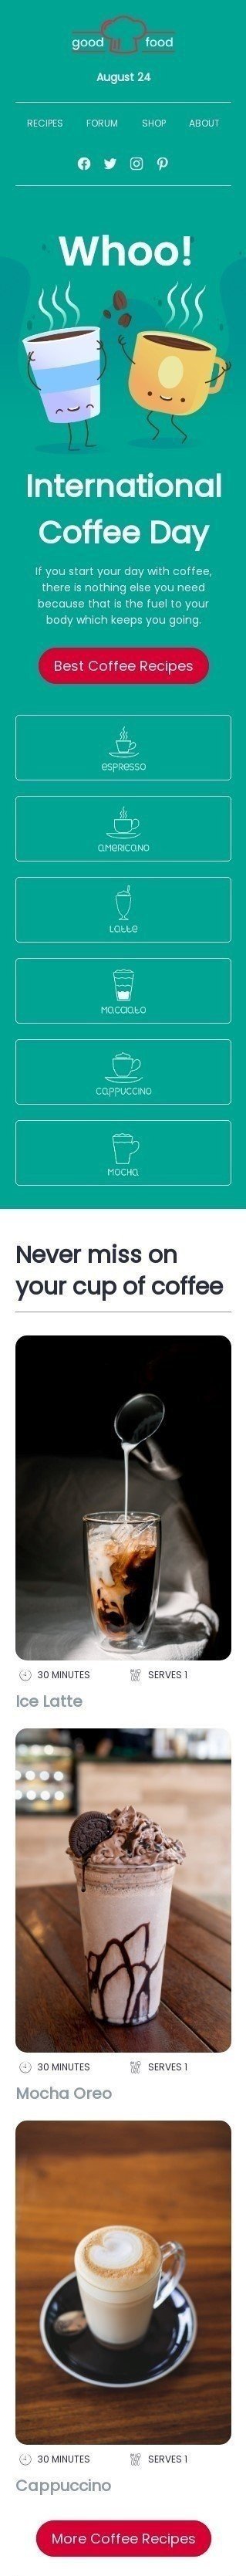 International Coffee Day Email Template "Best coffee recipes" for Food industry mobile view